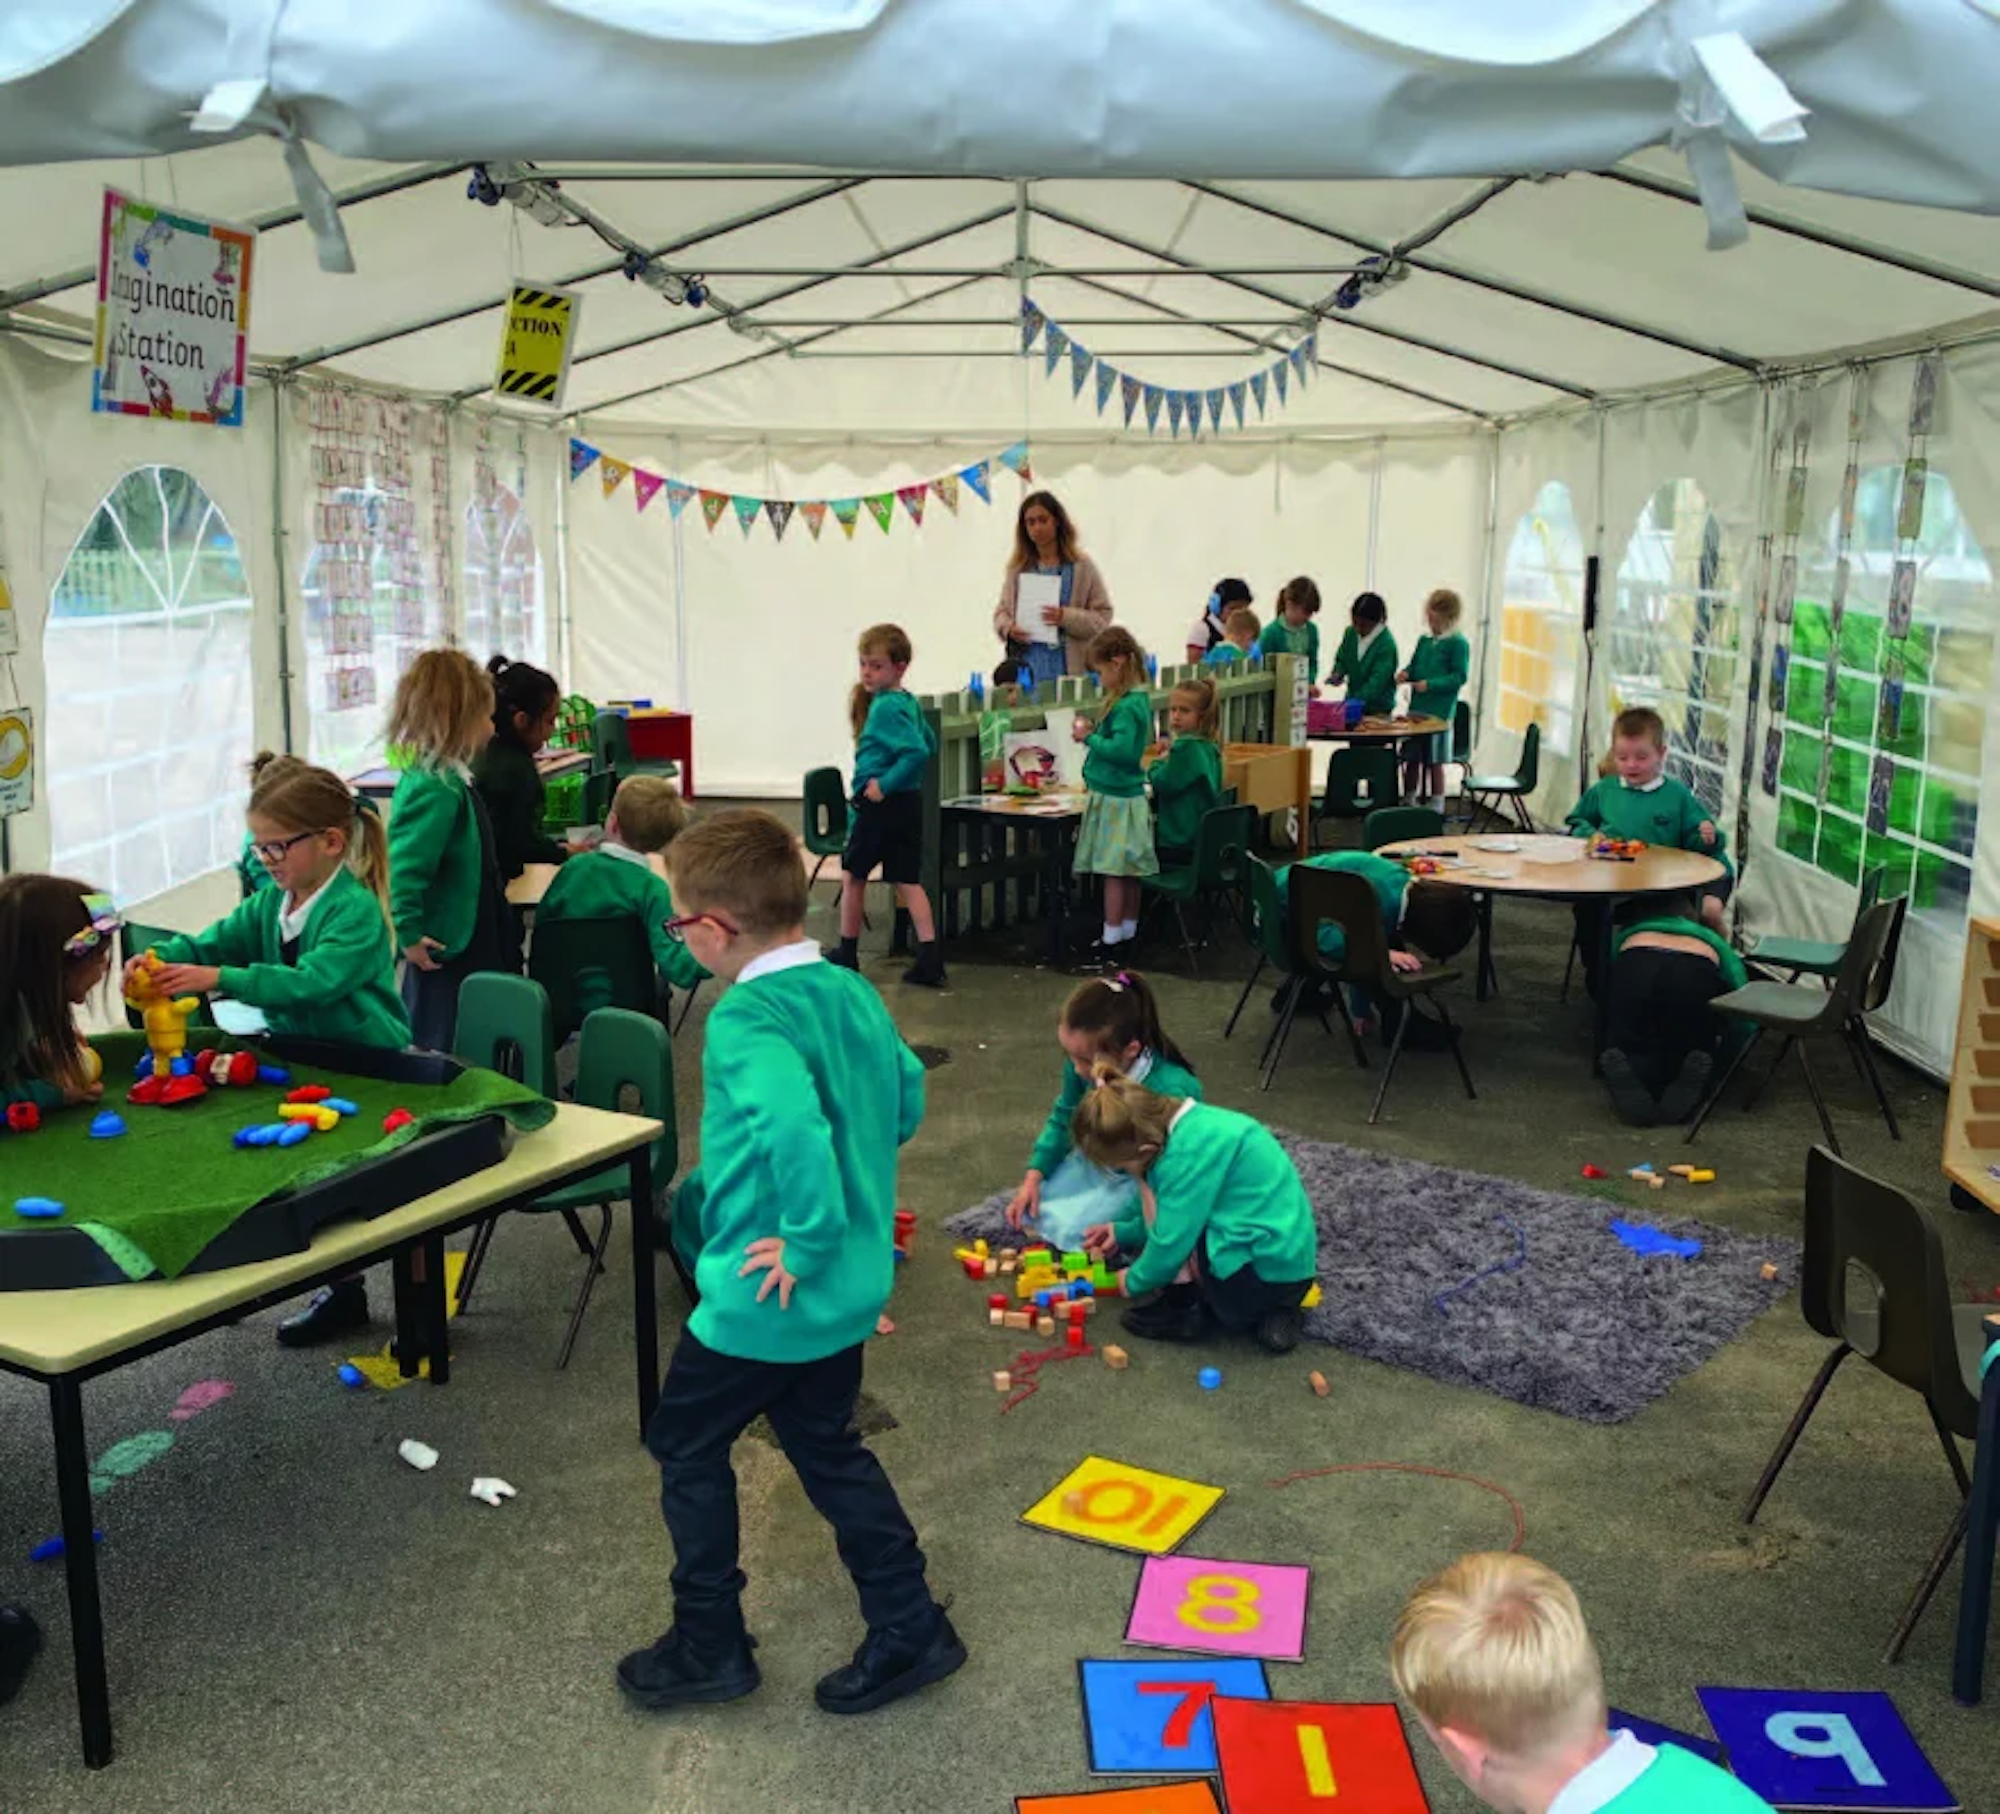 Children playing in the marquee